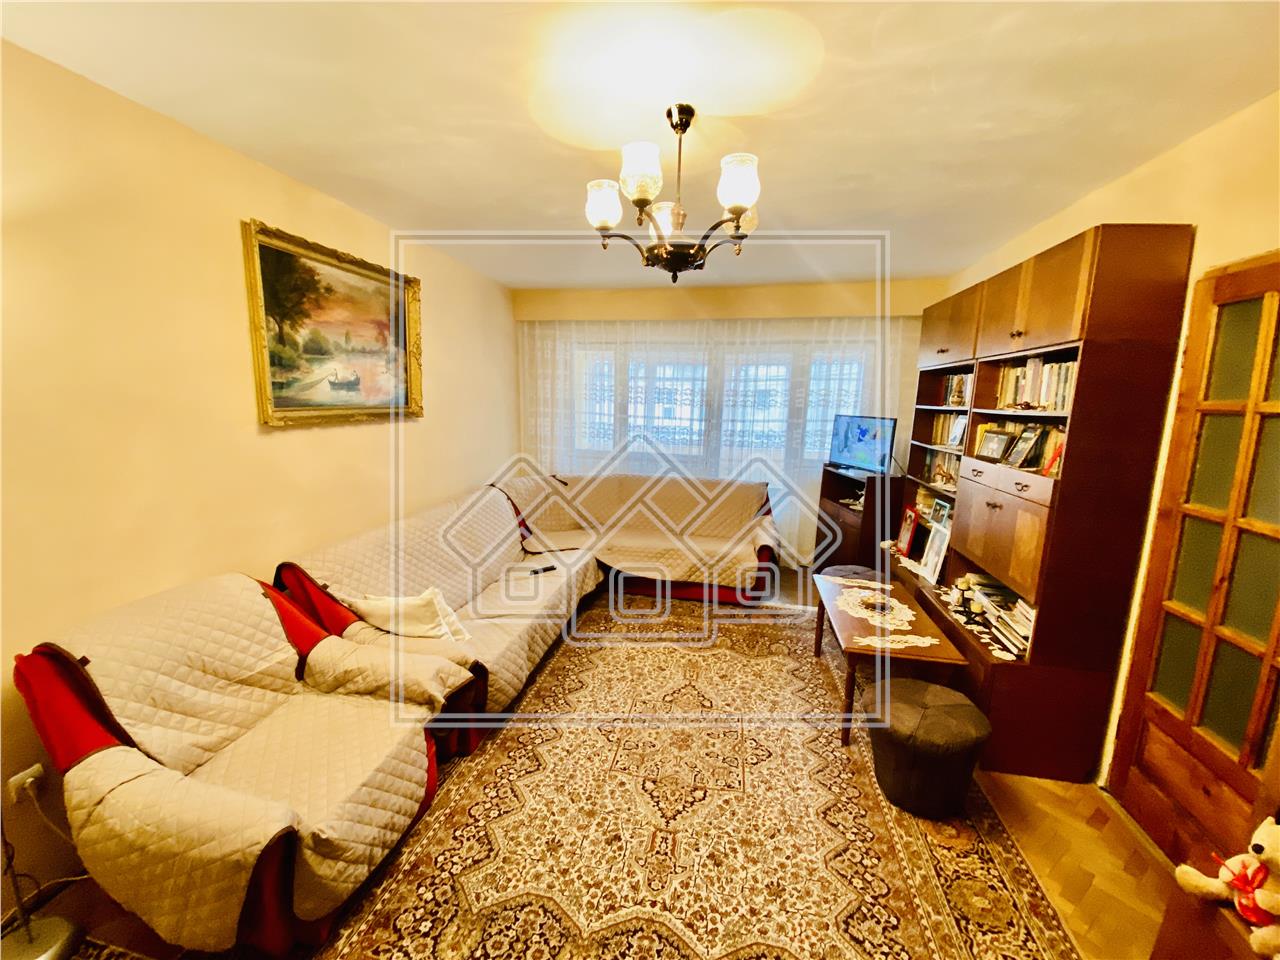 Apartment for sale in Sibiu -4 rooms and closed balcony - Central Area